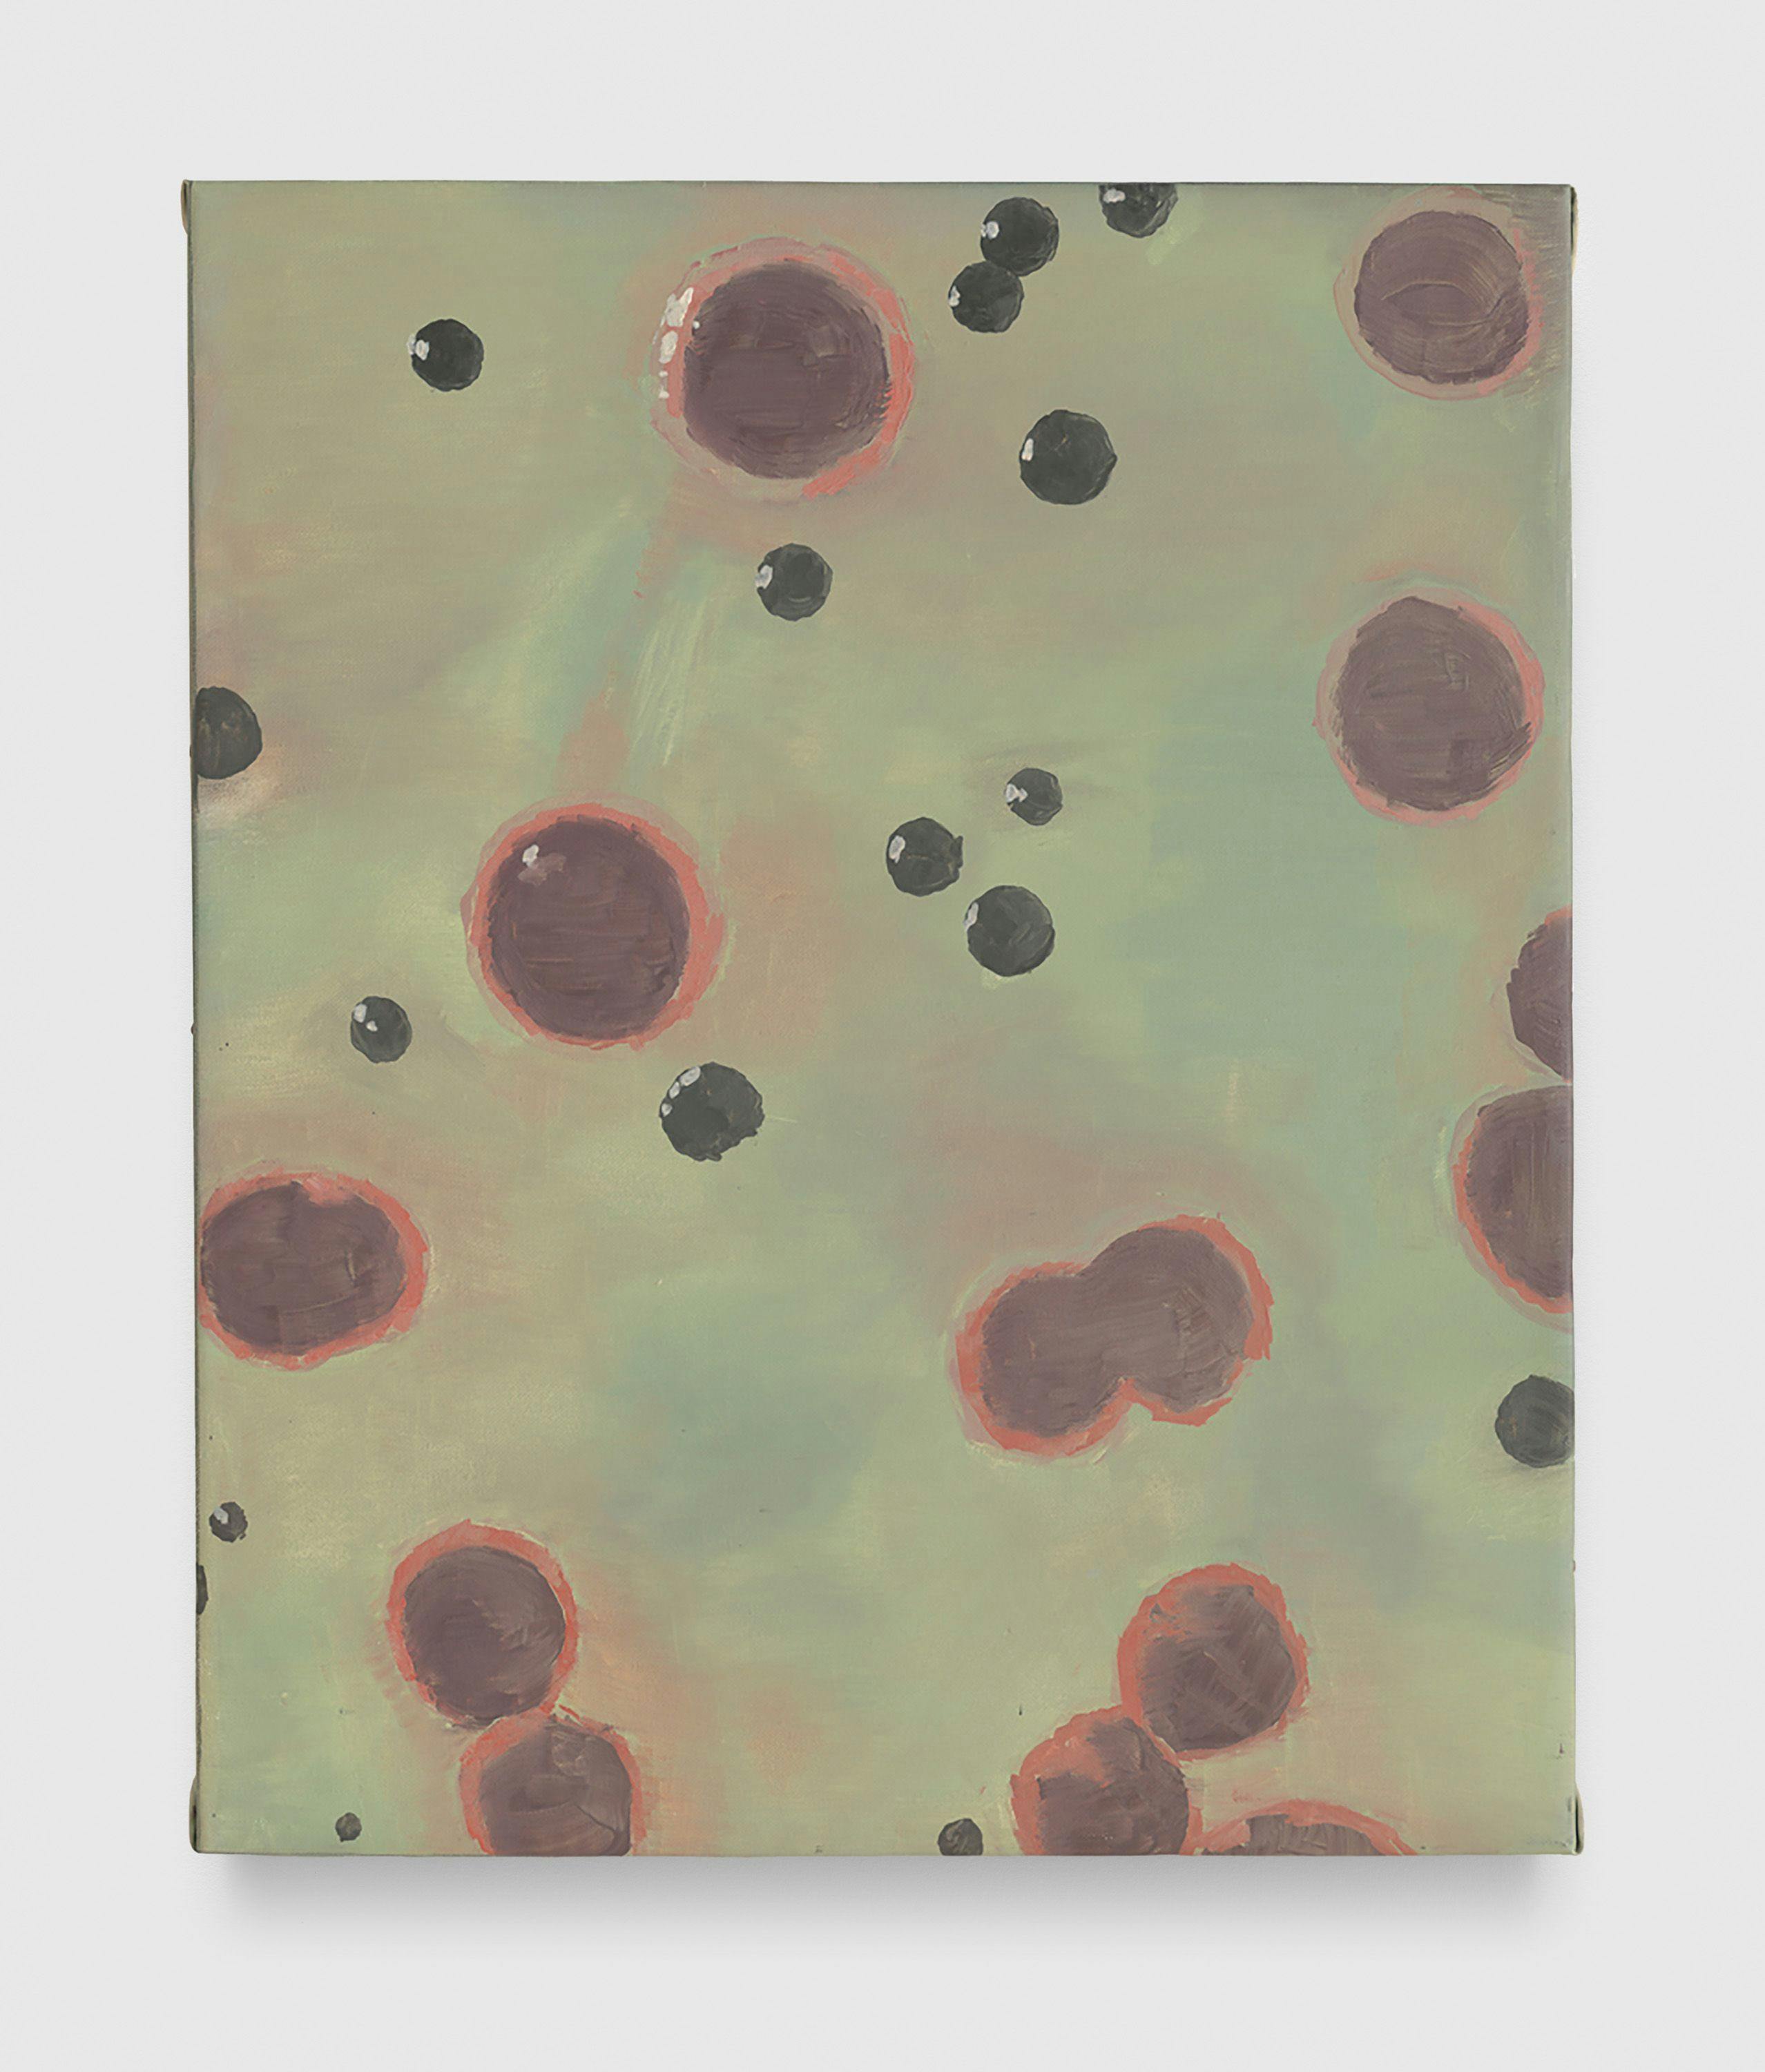 A painting by Luc Tuymans, titled Bloodstains, dated 1993.